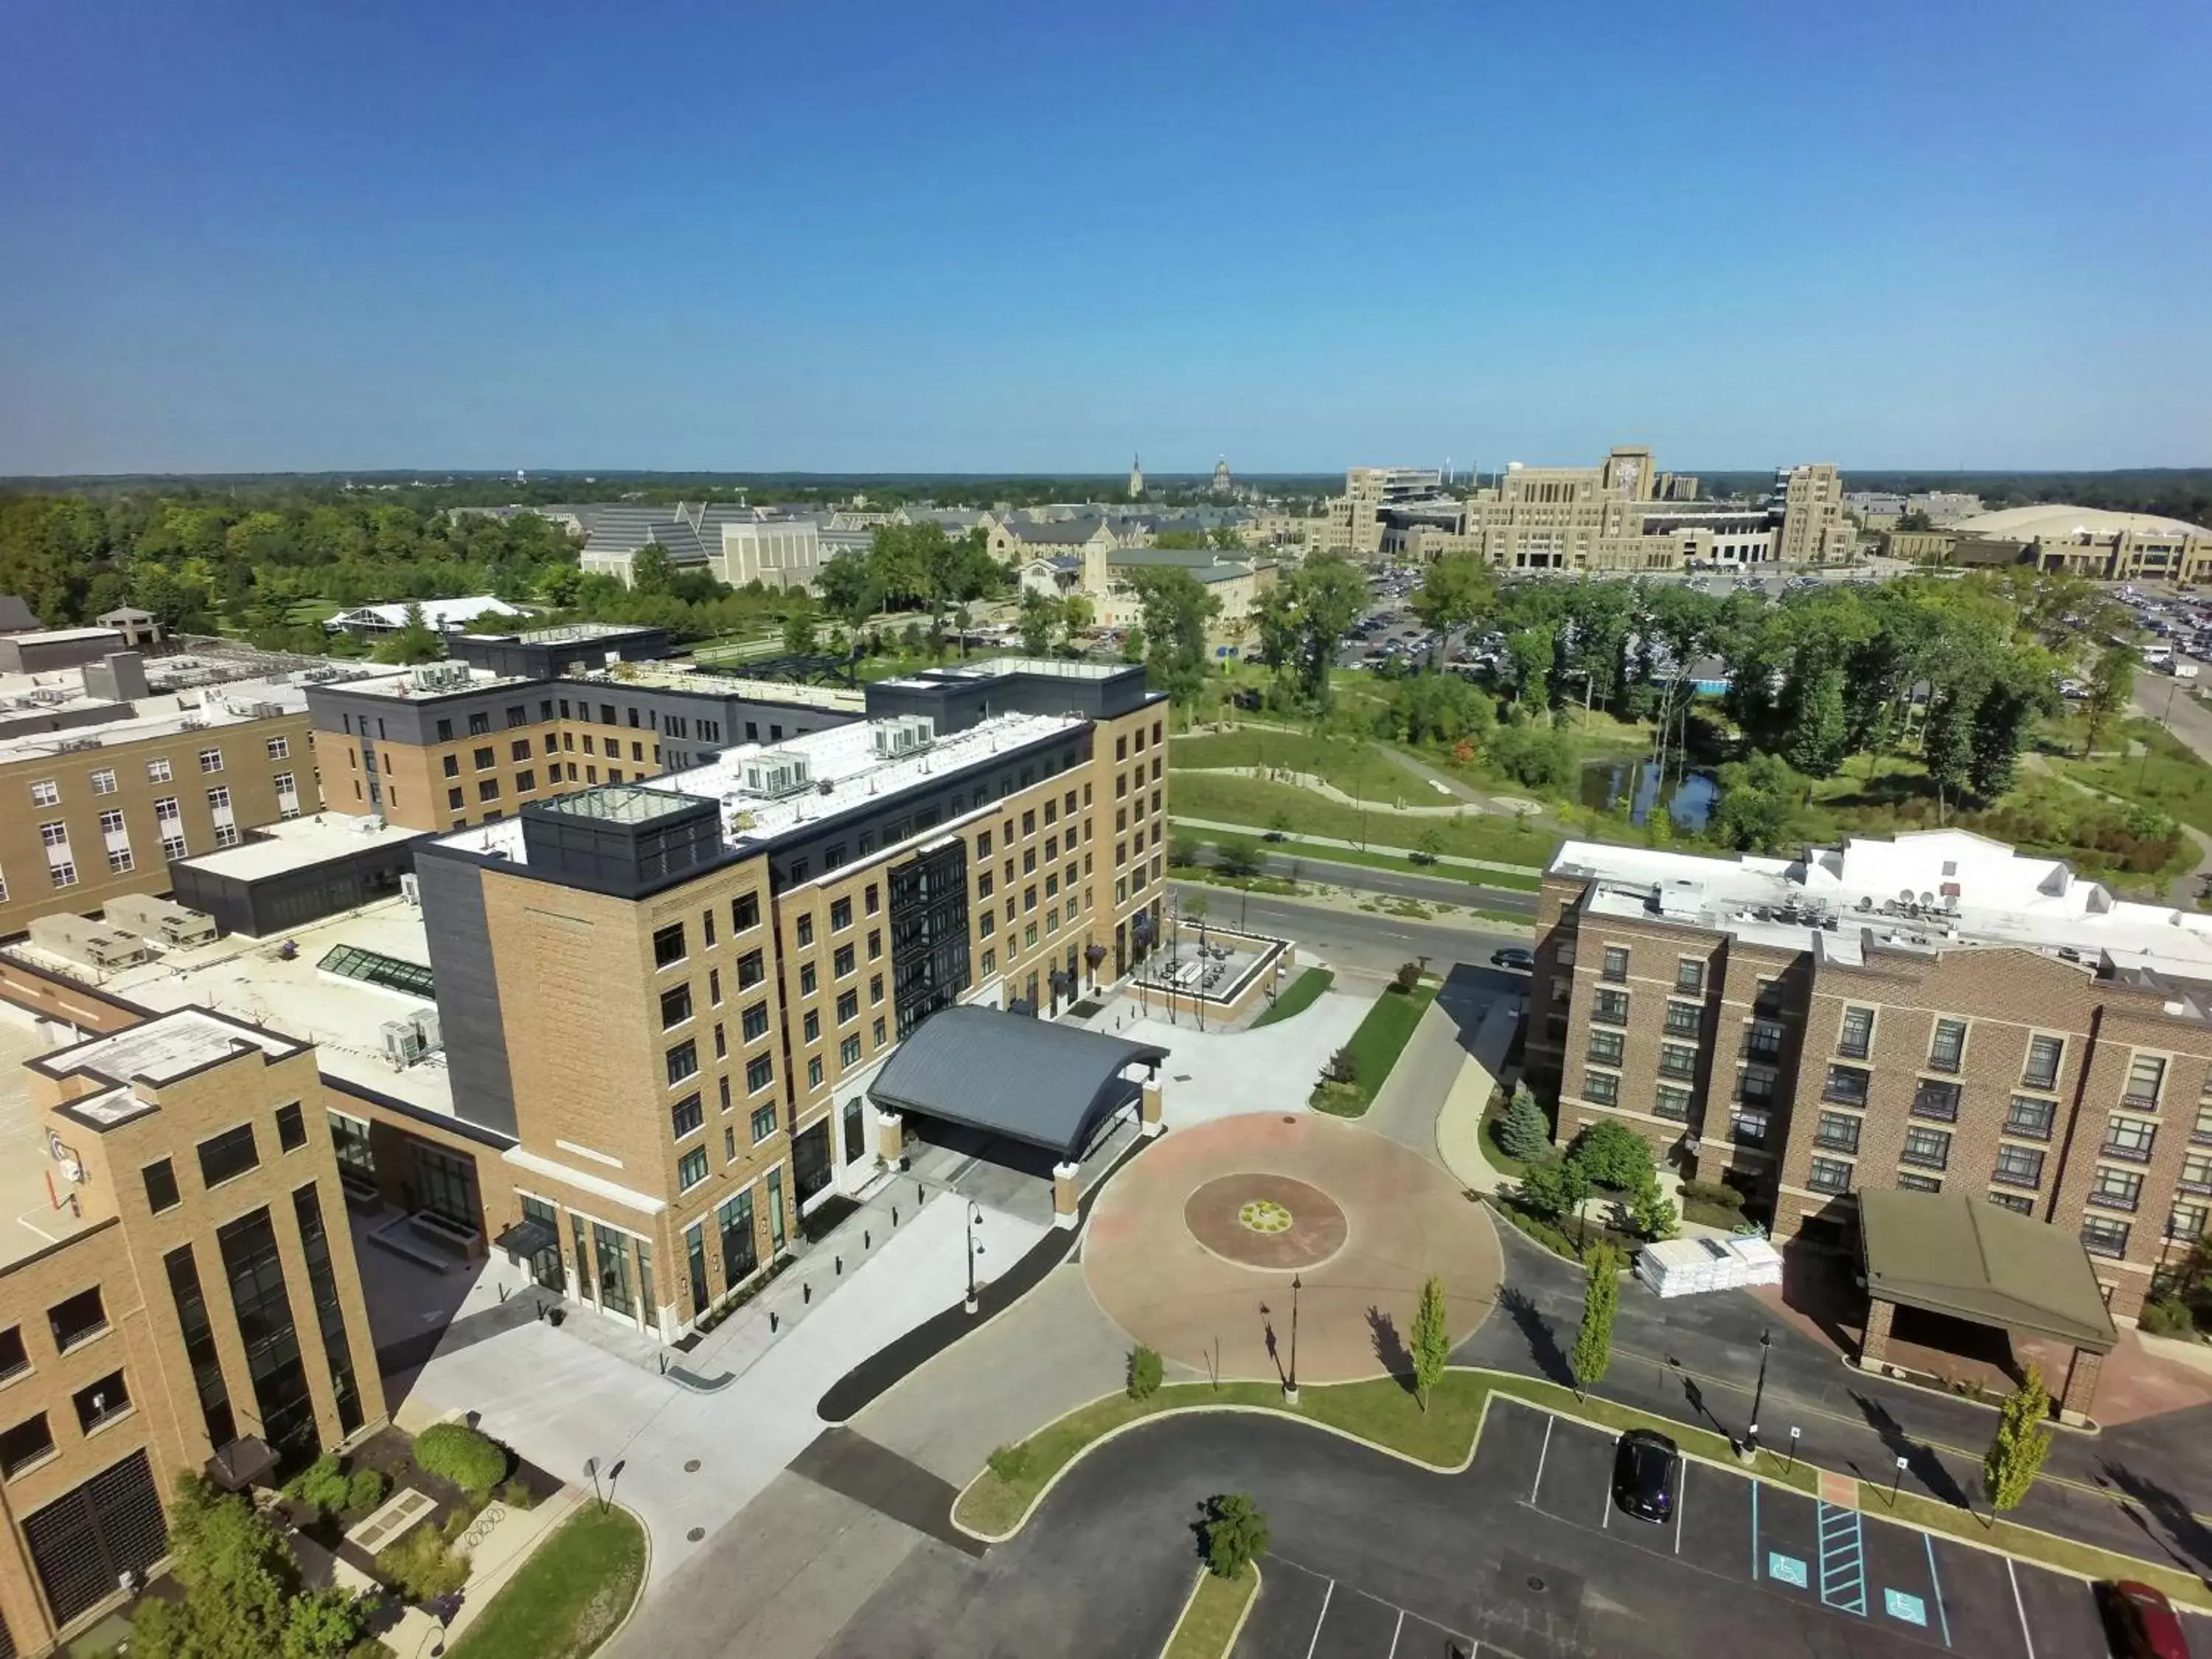 Property building, Bird's-eye View in Embassy Suites by Hilton South Bend